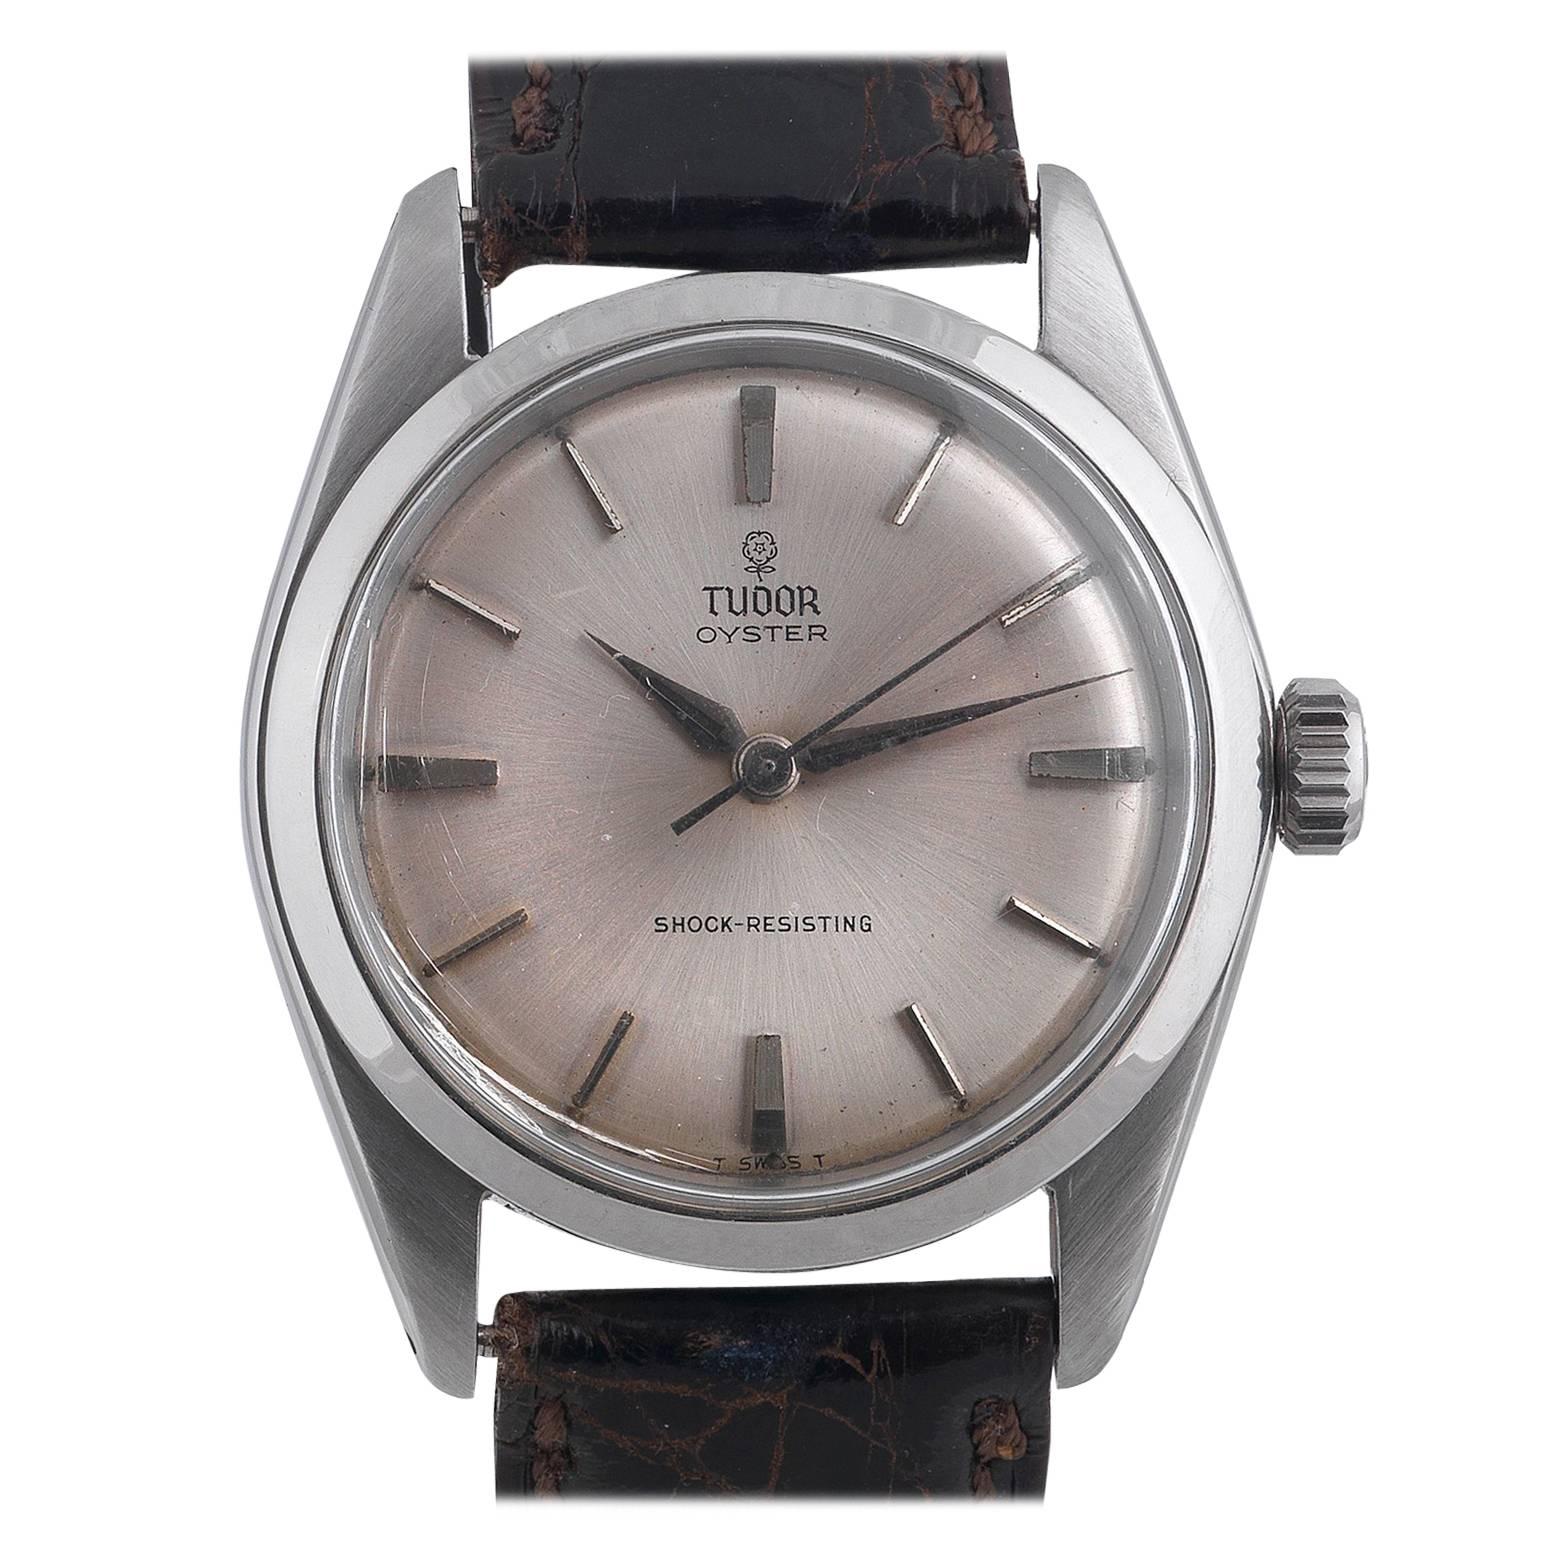 Tudor Rolex Stainless Steel Oyster Royal manual wristwatch Ref 7934, circa 1965